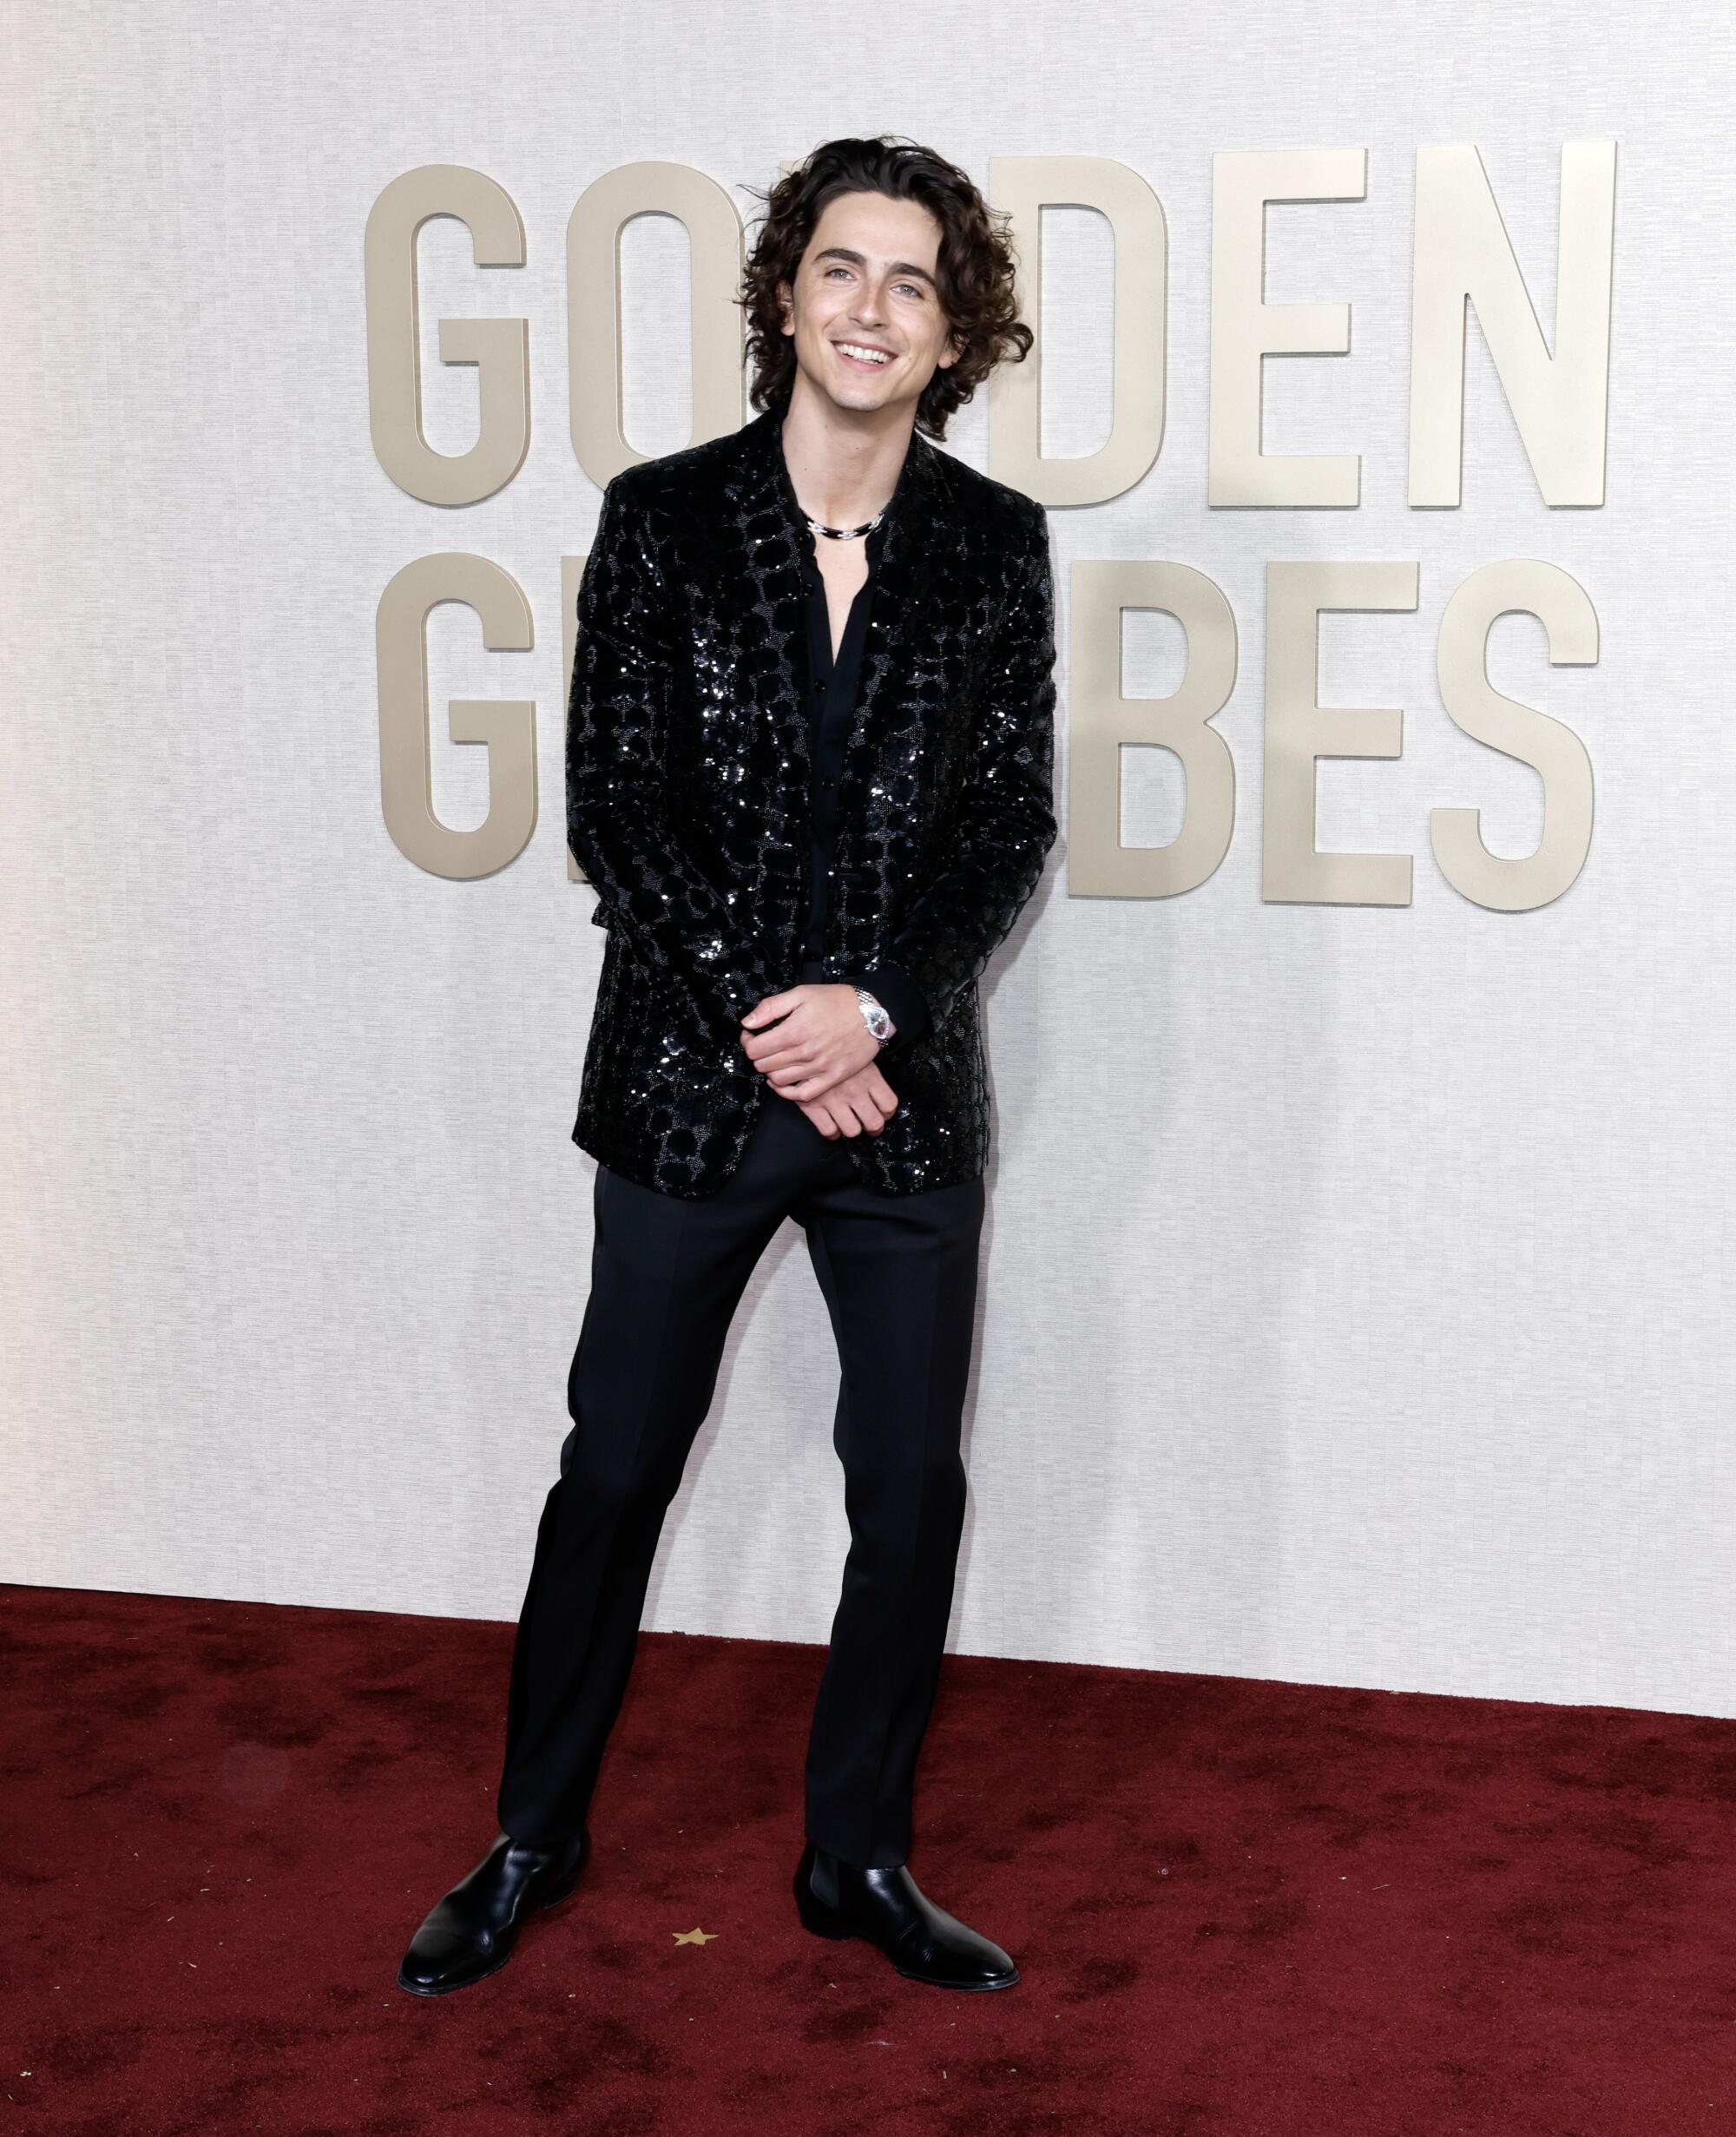 Timothee Chalamet on the red carpet of the 81st Annual Golden Globe Awards held at the Beverly Hilton Hotel